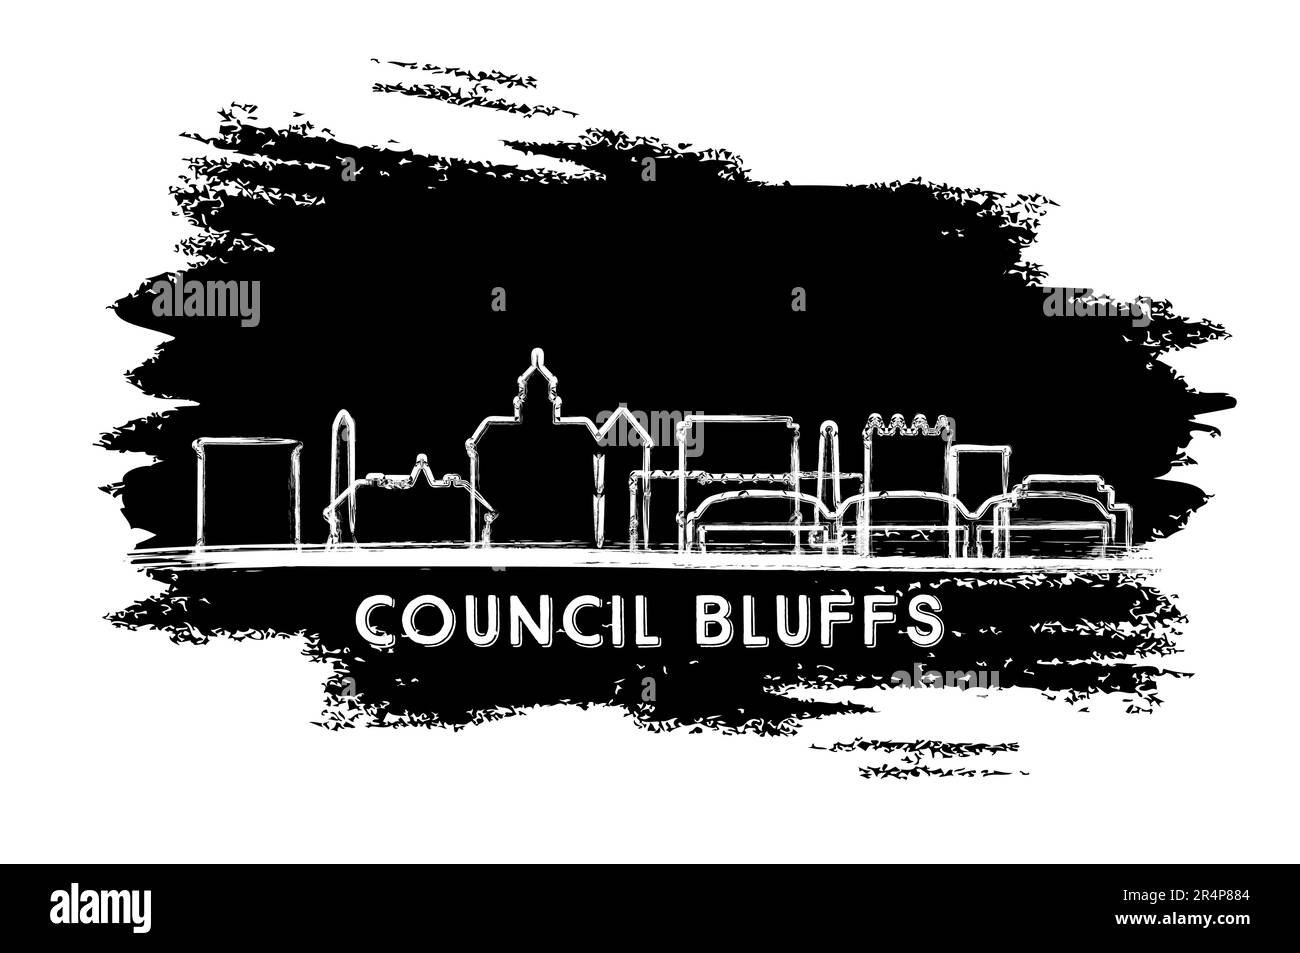 Council Bluffs Iowa USA City Skyline Silhouette. Hand Drawn Sketch. Business Travel and Tourism Concept with Historic Architecture. Stock Vector